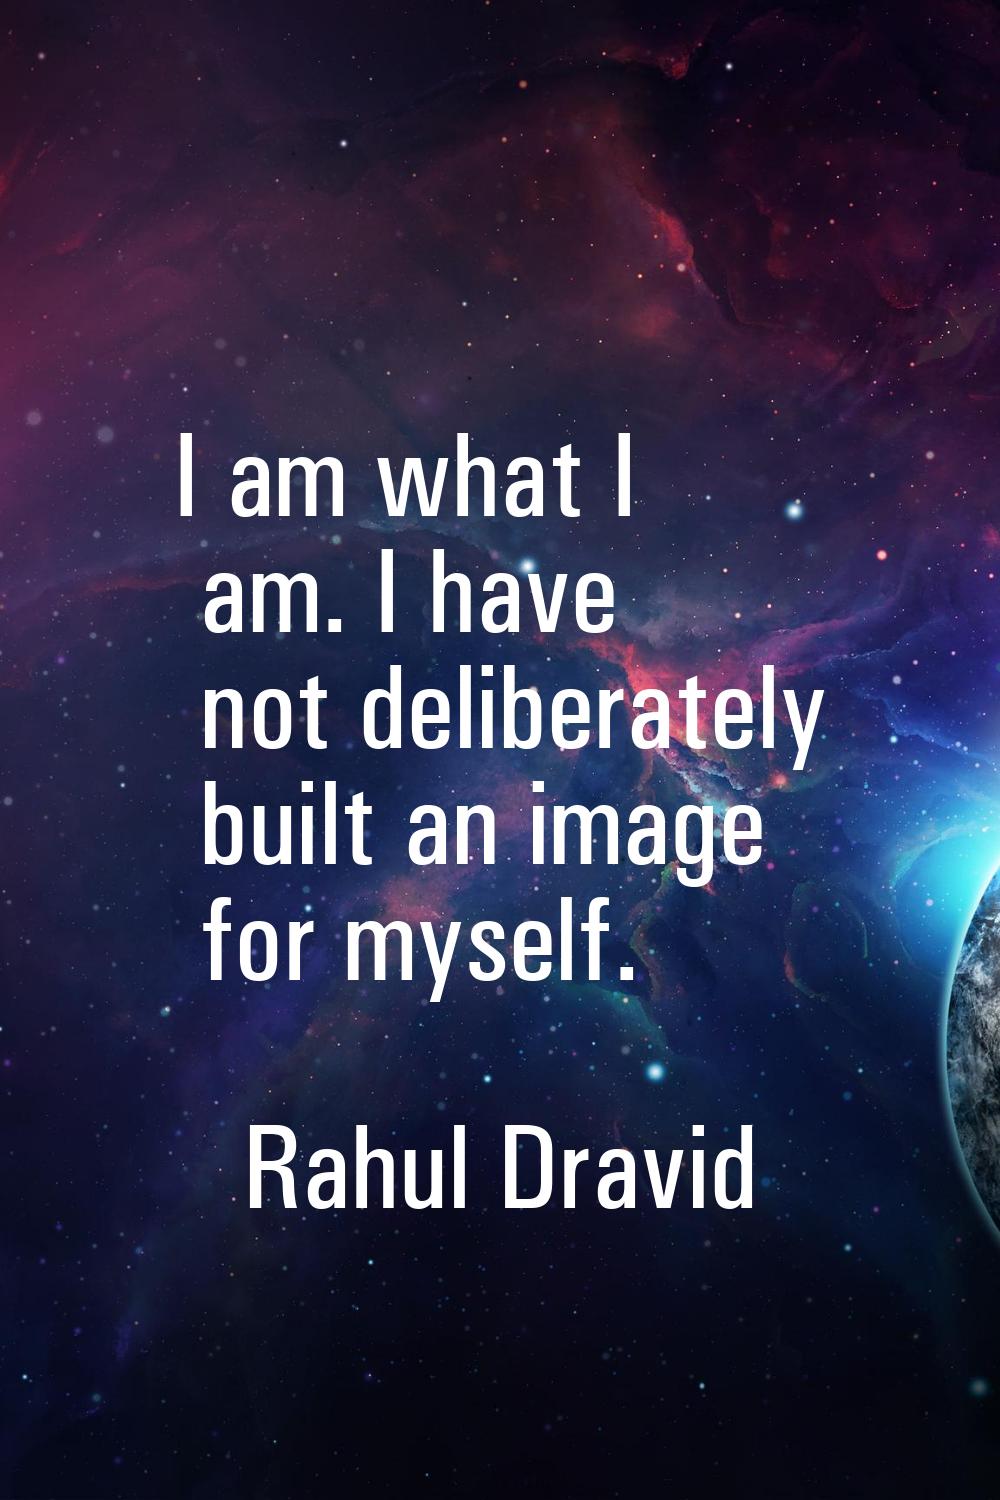 I am what I am. I have not deliberately built an image for myself.